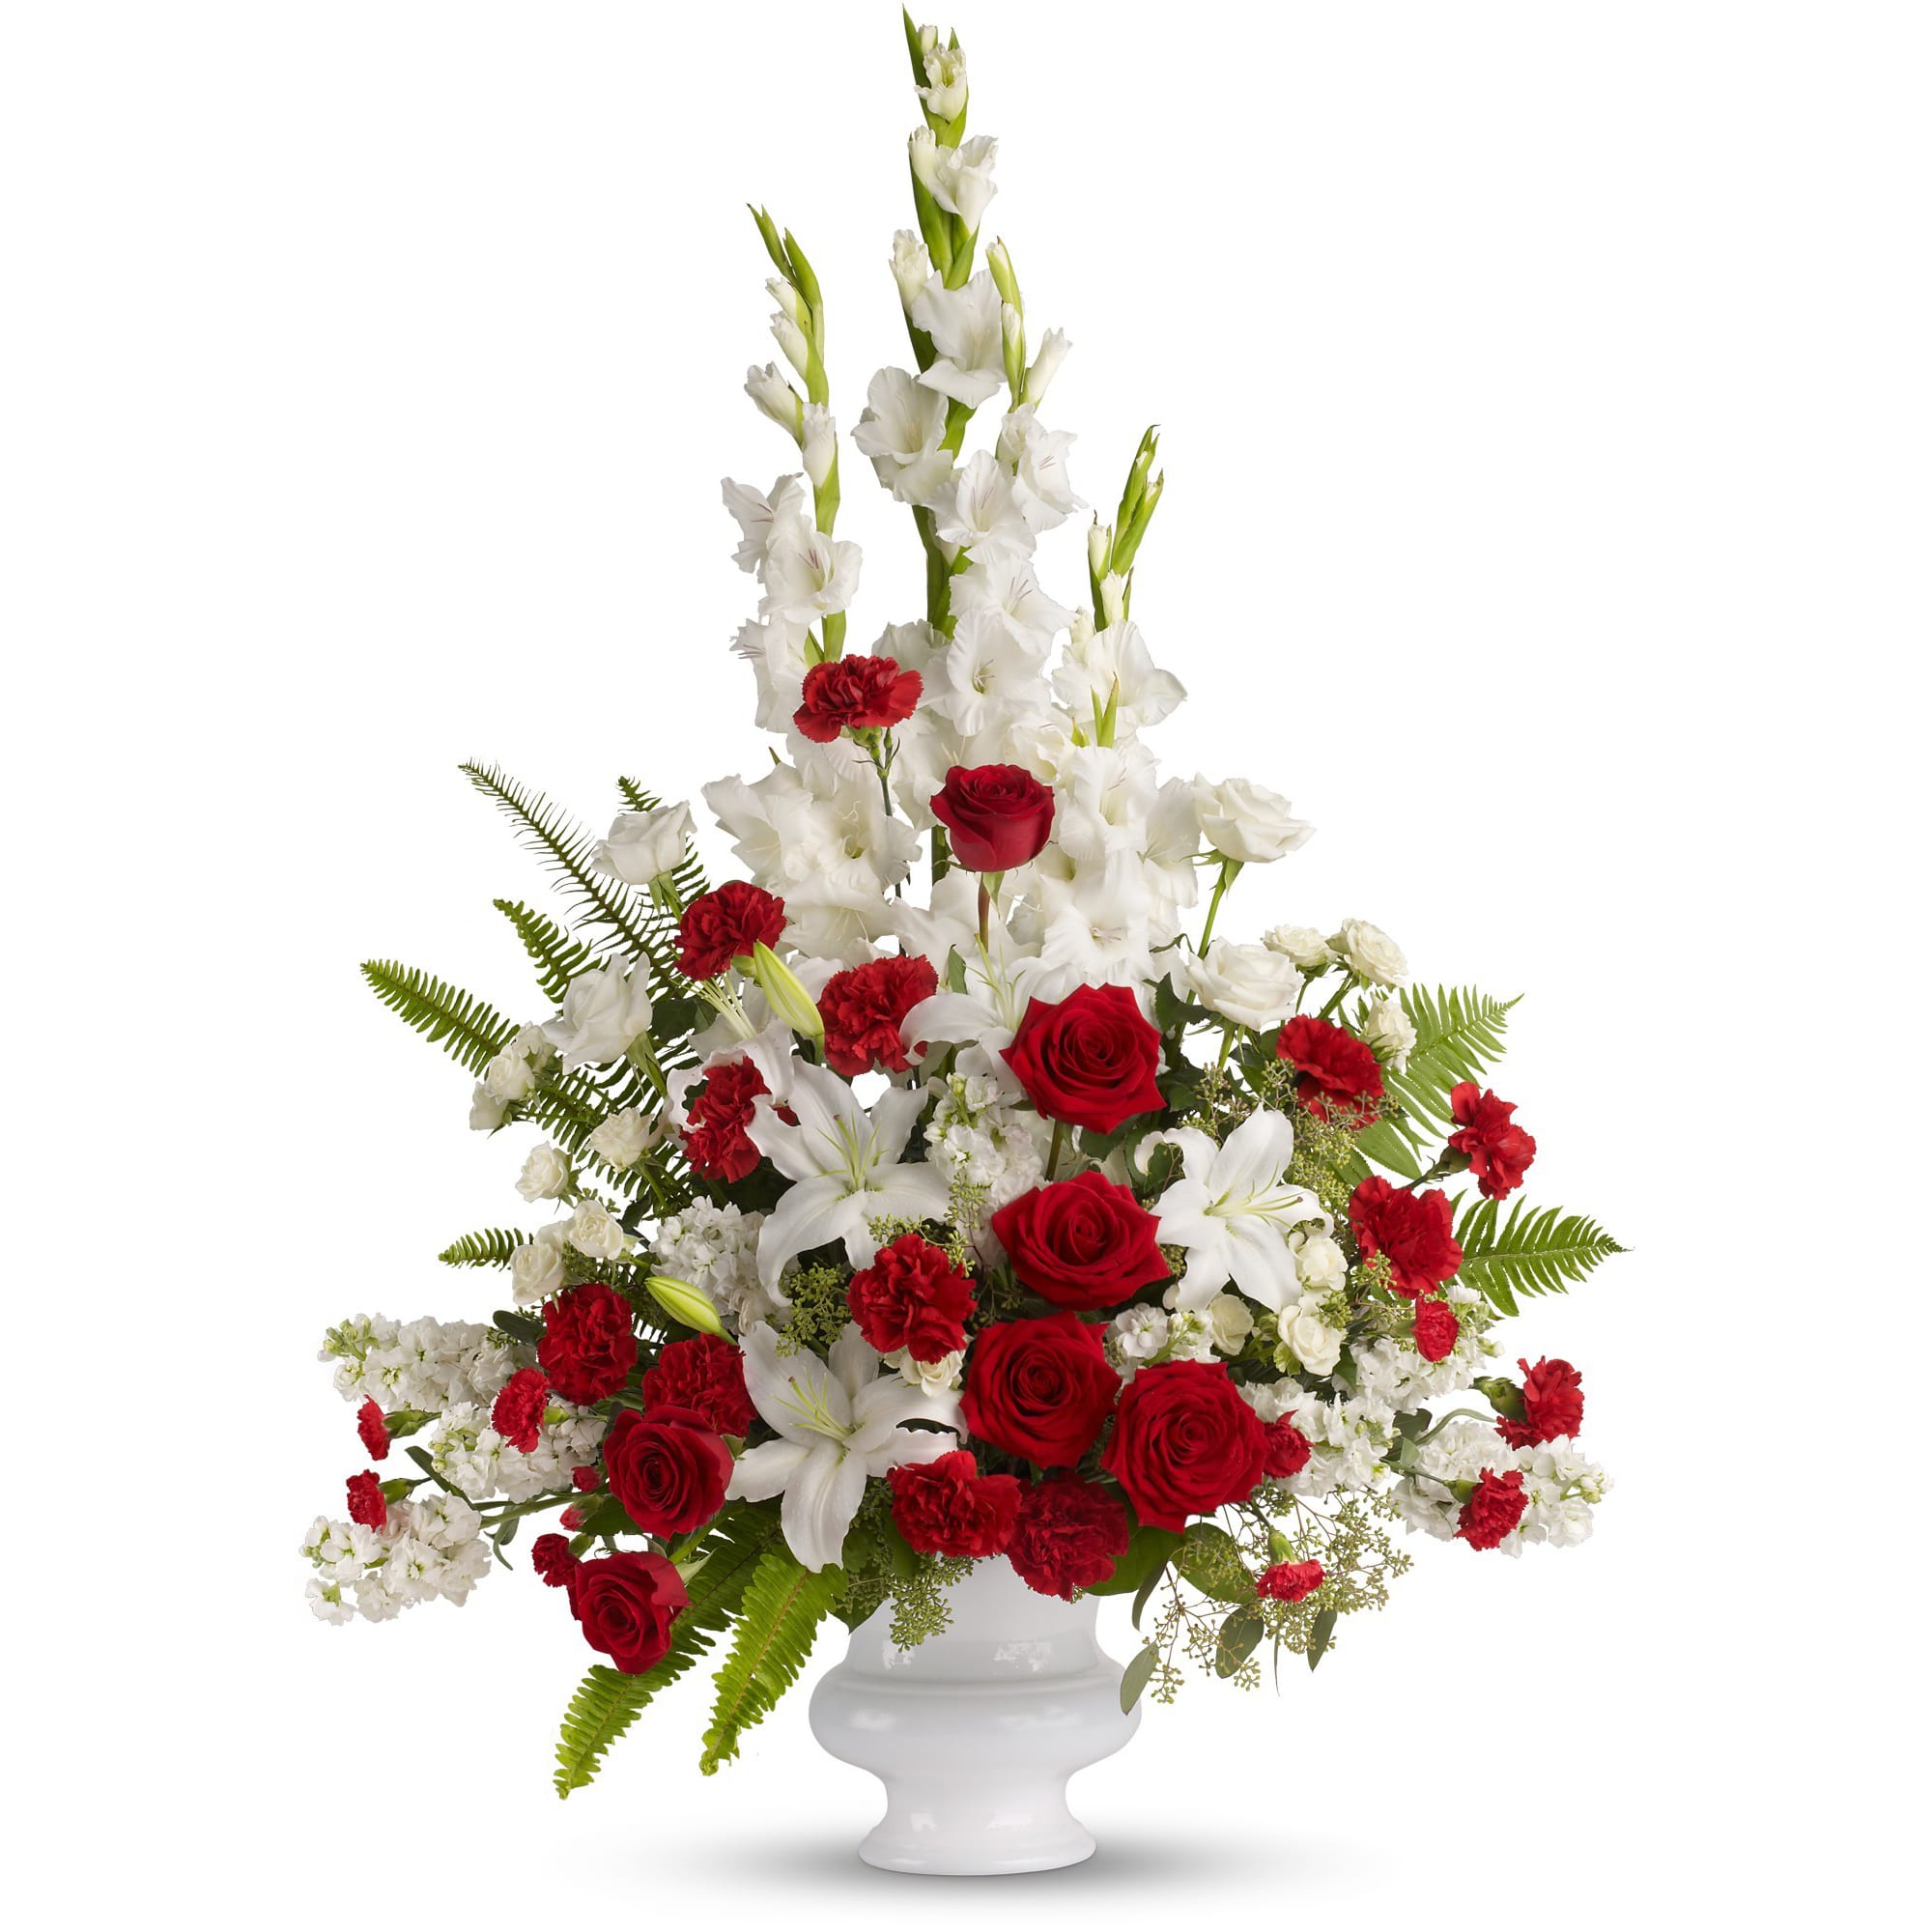 Memories to Treasure by Teleflora - For the sweet spirits who touch our lives, a classic pairing of red and white that is both vibrant and respectful. Beautifully contained in a white urn. 